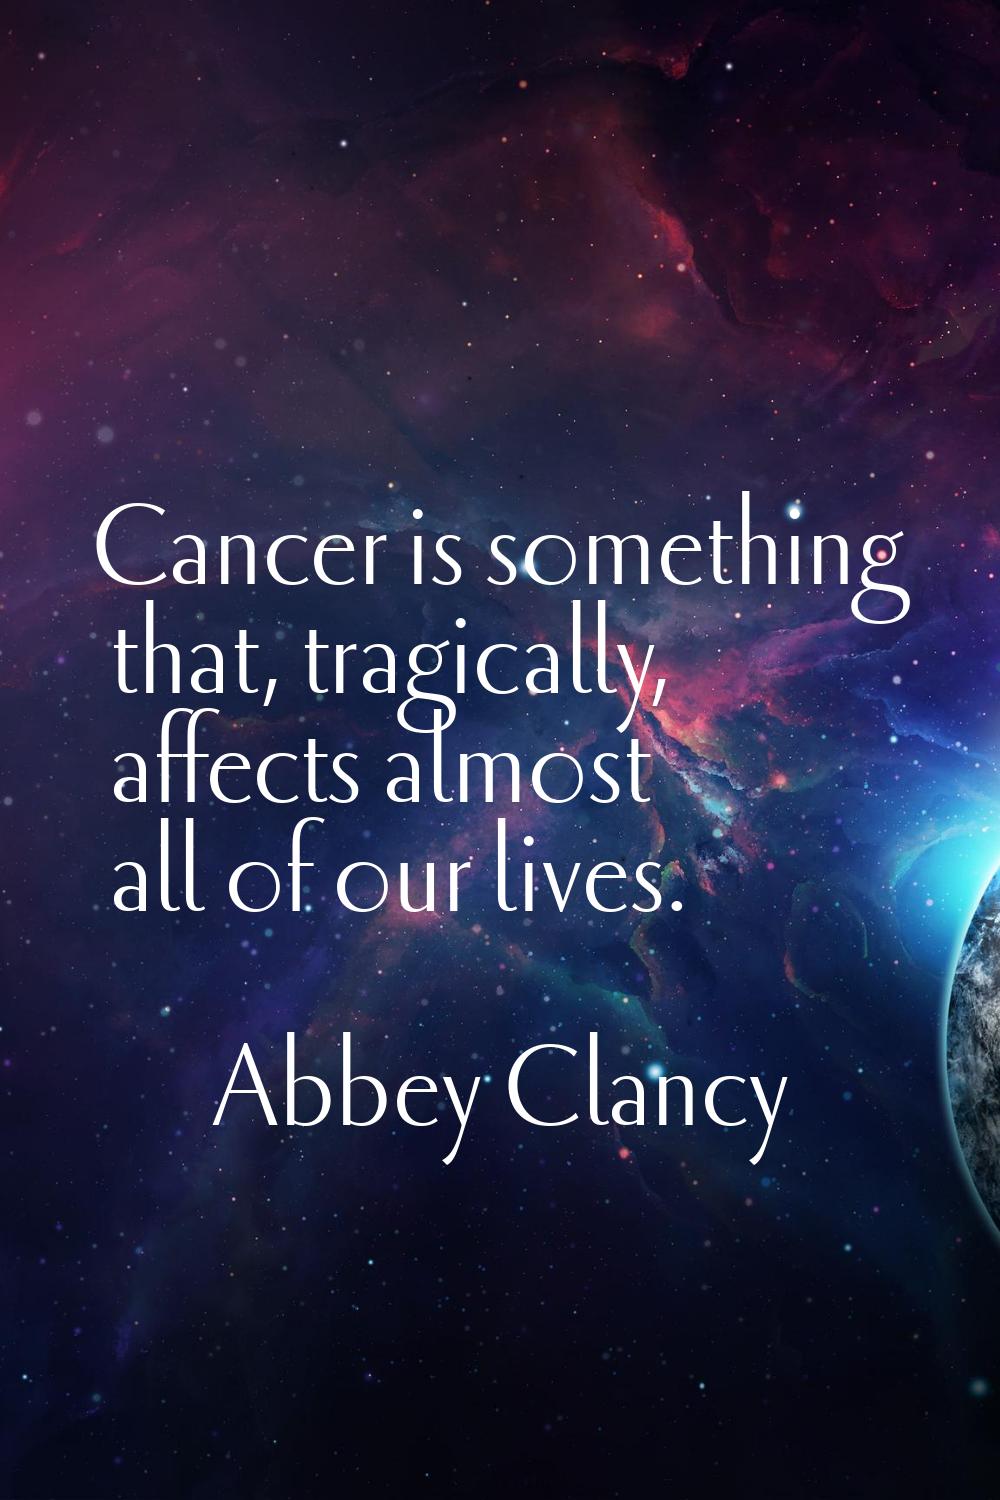 Cancer is something that, tragically, affects almost all of our lives.